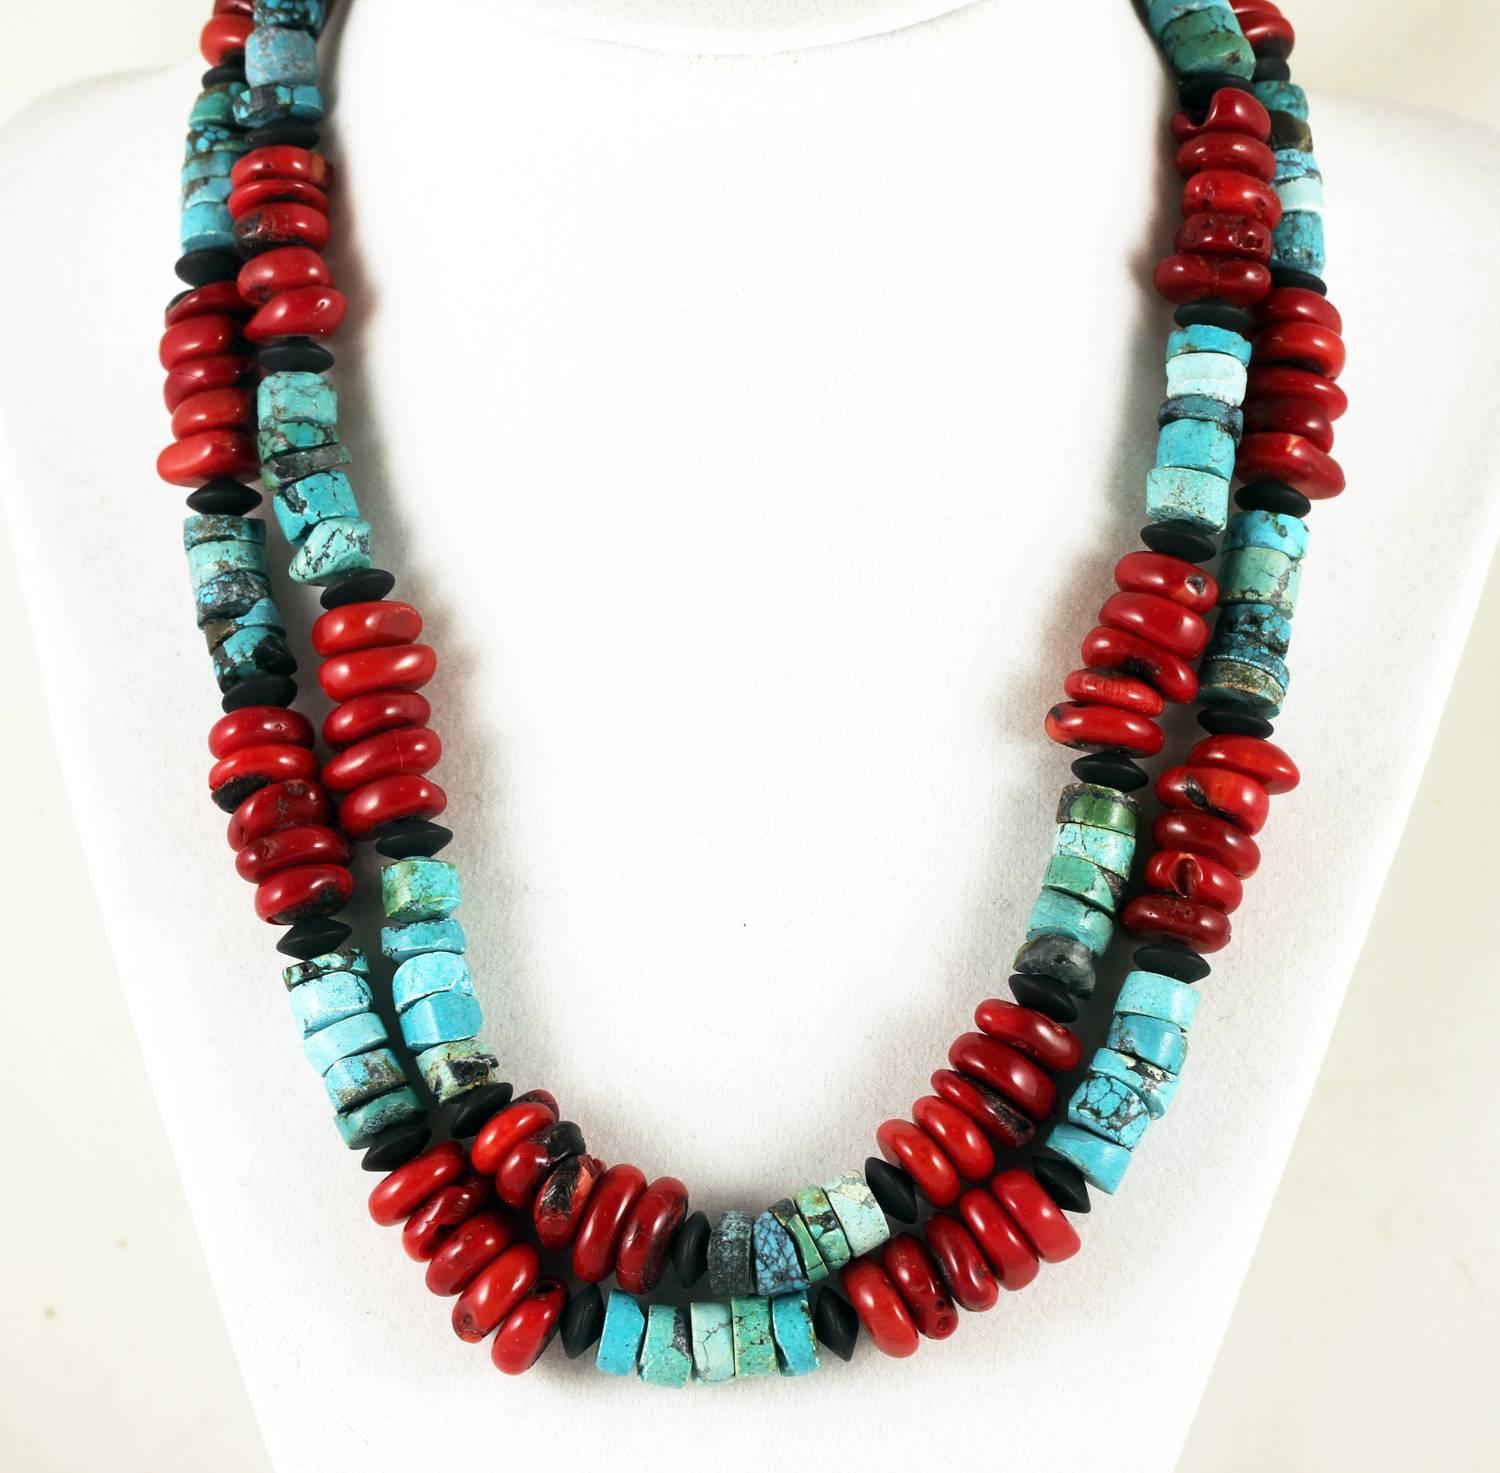 Unique handmade double strand of natural Arizona Turquoise rondels and polished gemmy slices of  red Bamboo Coral accented with black Onyx rondels
Size:  Coral varies approximately 12 mm
Length:  18 inches
Clasp:  silver tone
